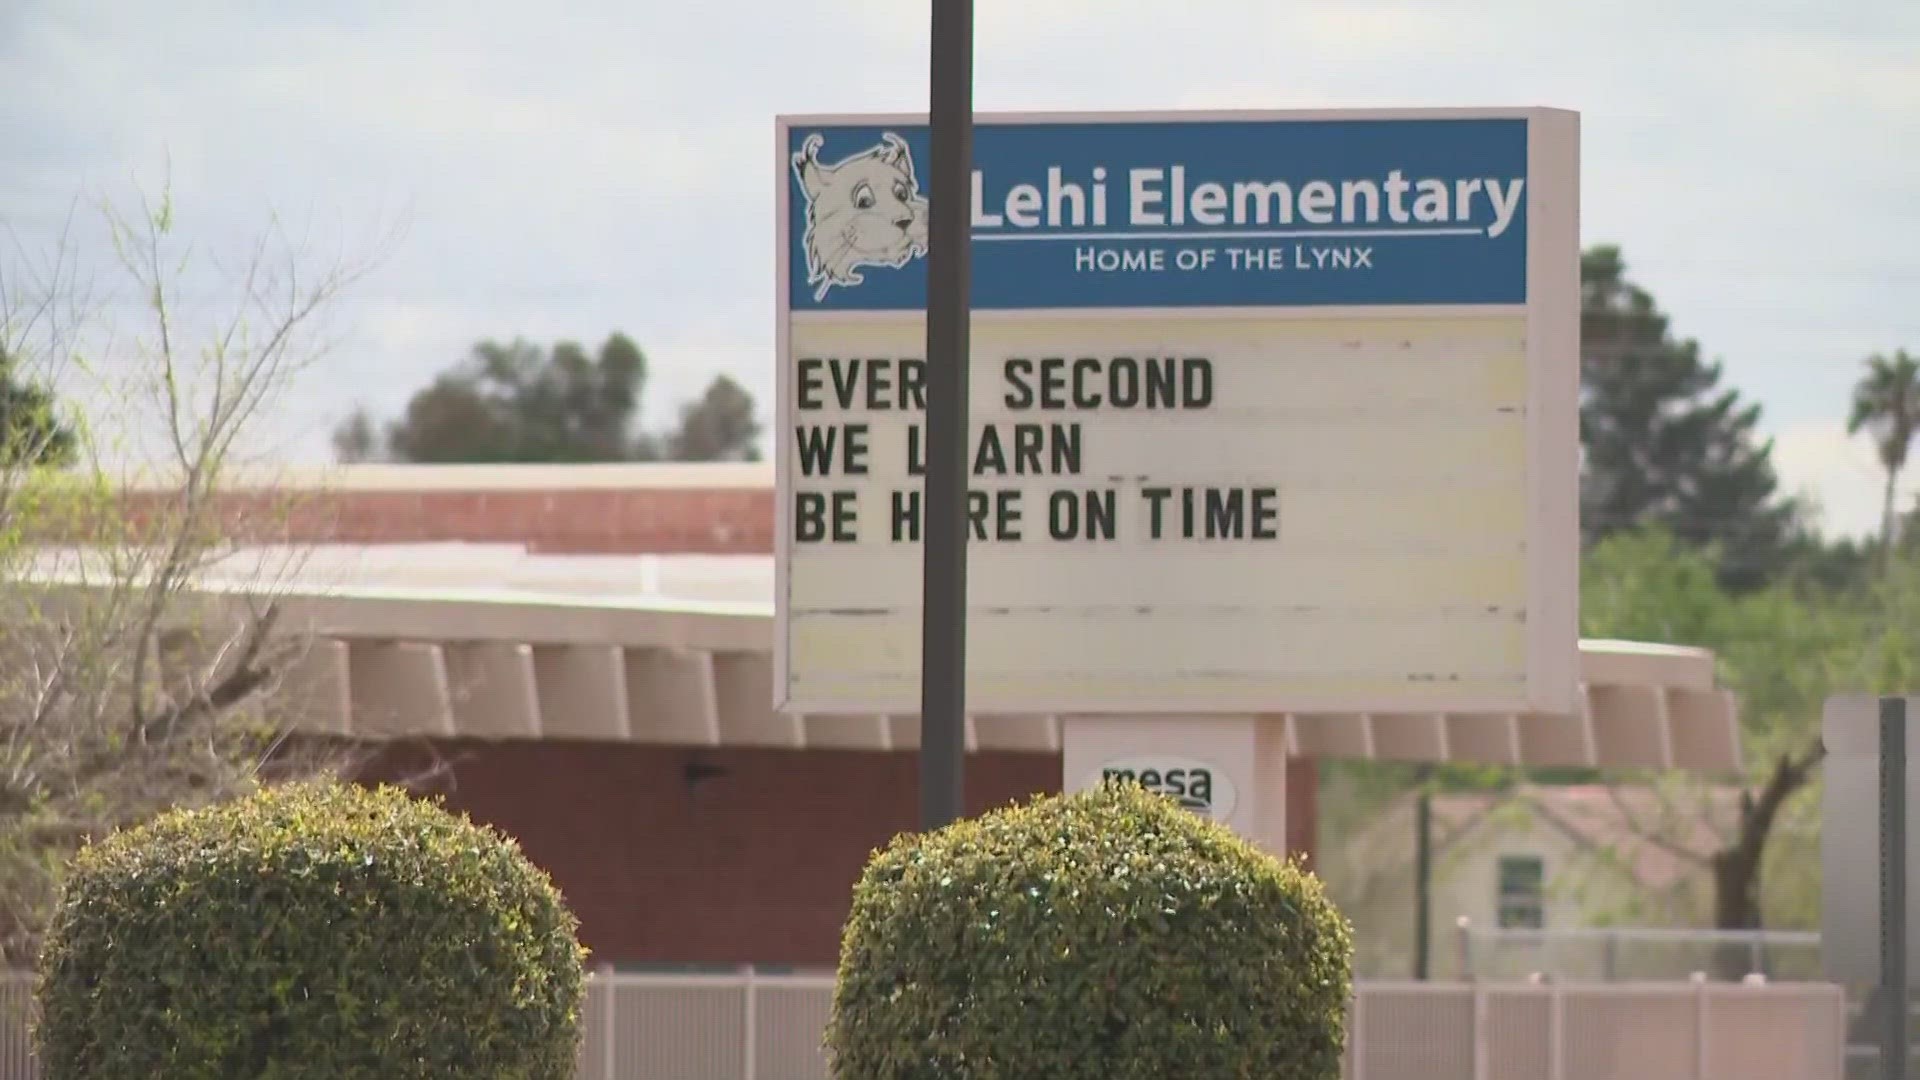 Antonio Jordan, who worked as a teacher's assistant at Lehi Elementary School, has been arrested for offenses involving a stethoscope.